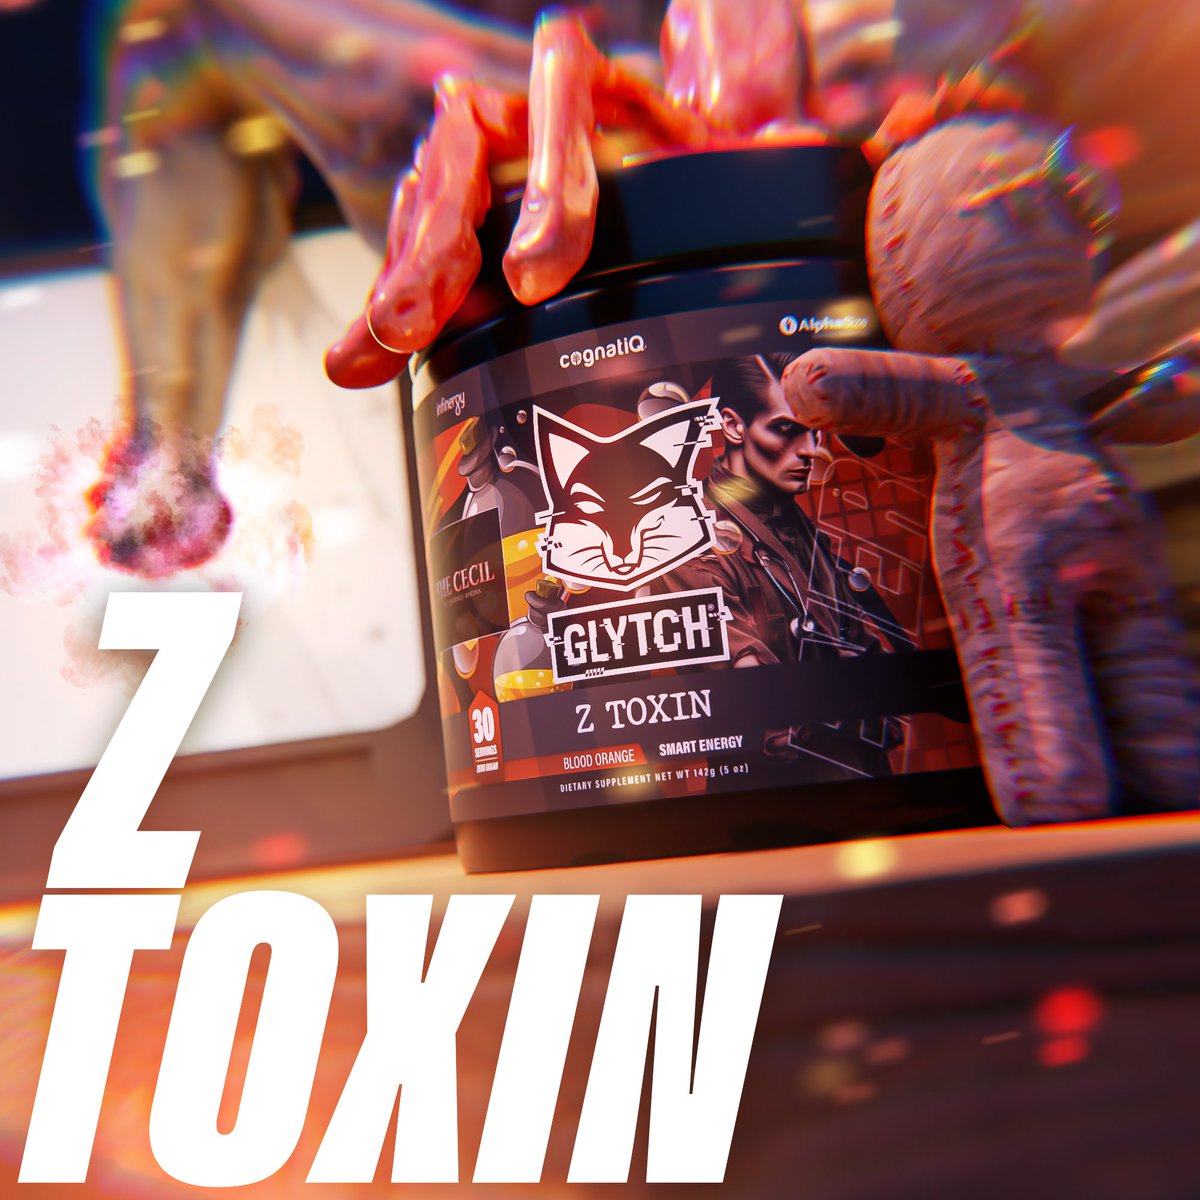 Like this post if you NEED a tub of Z Toxin😋 We’ve teamed up with The Cecil: The Journey Begins to bring you the GLYTCHFam a mouth-watering Blood Orange flavor🩸🟠 Do you dare embark on this Quest?👀 Stock up on this delicious flavor today! glytchenergy.com/product/ztoxin/